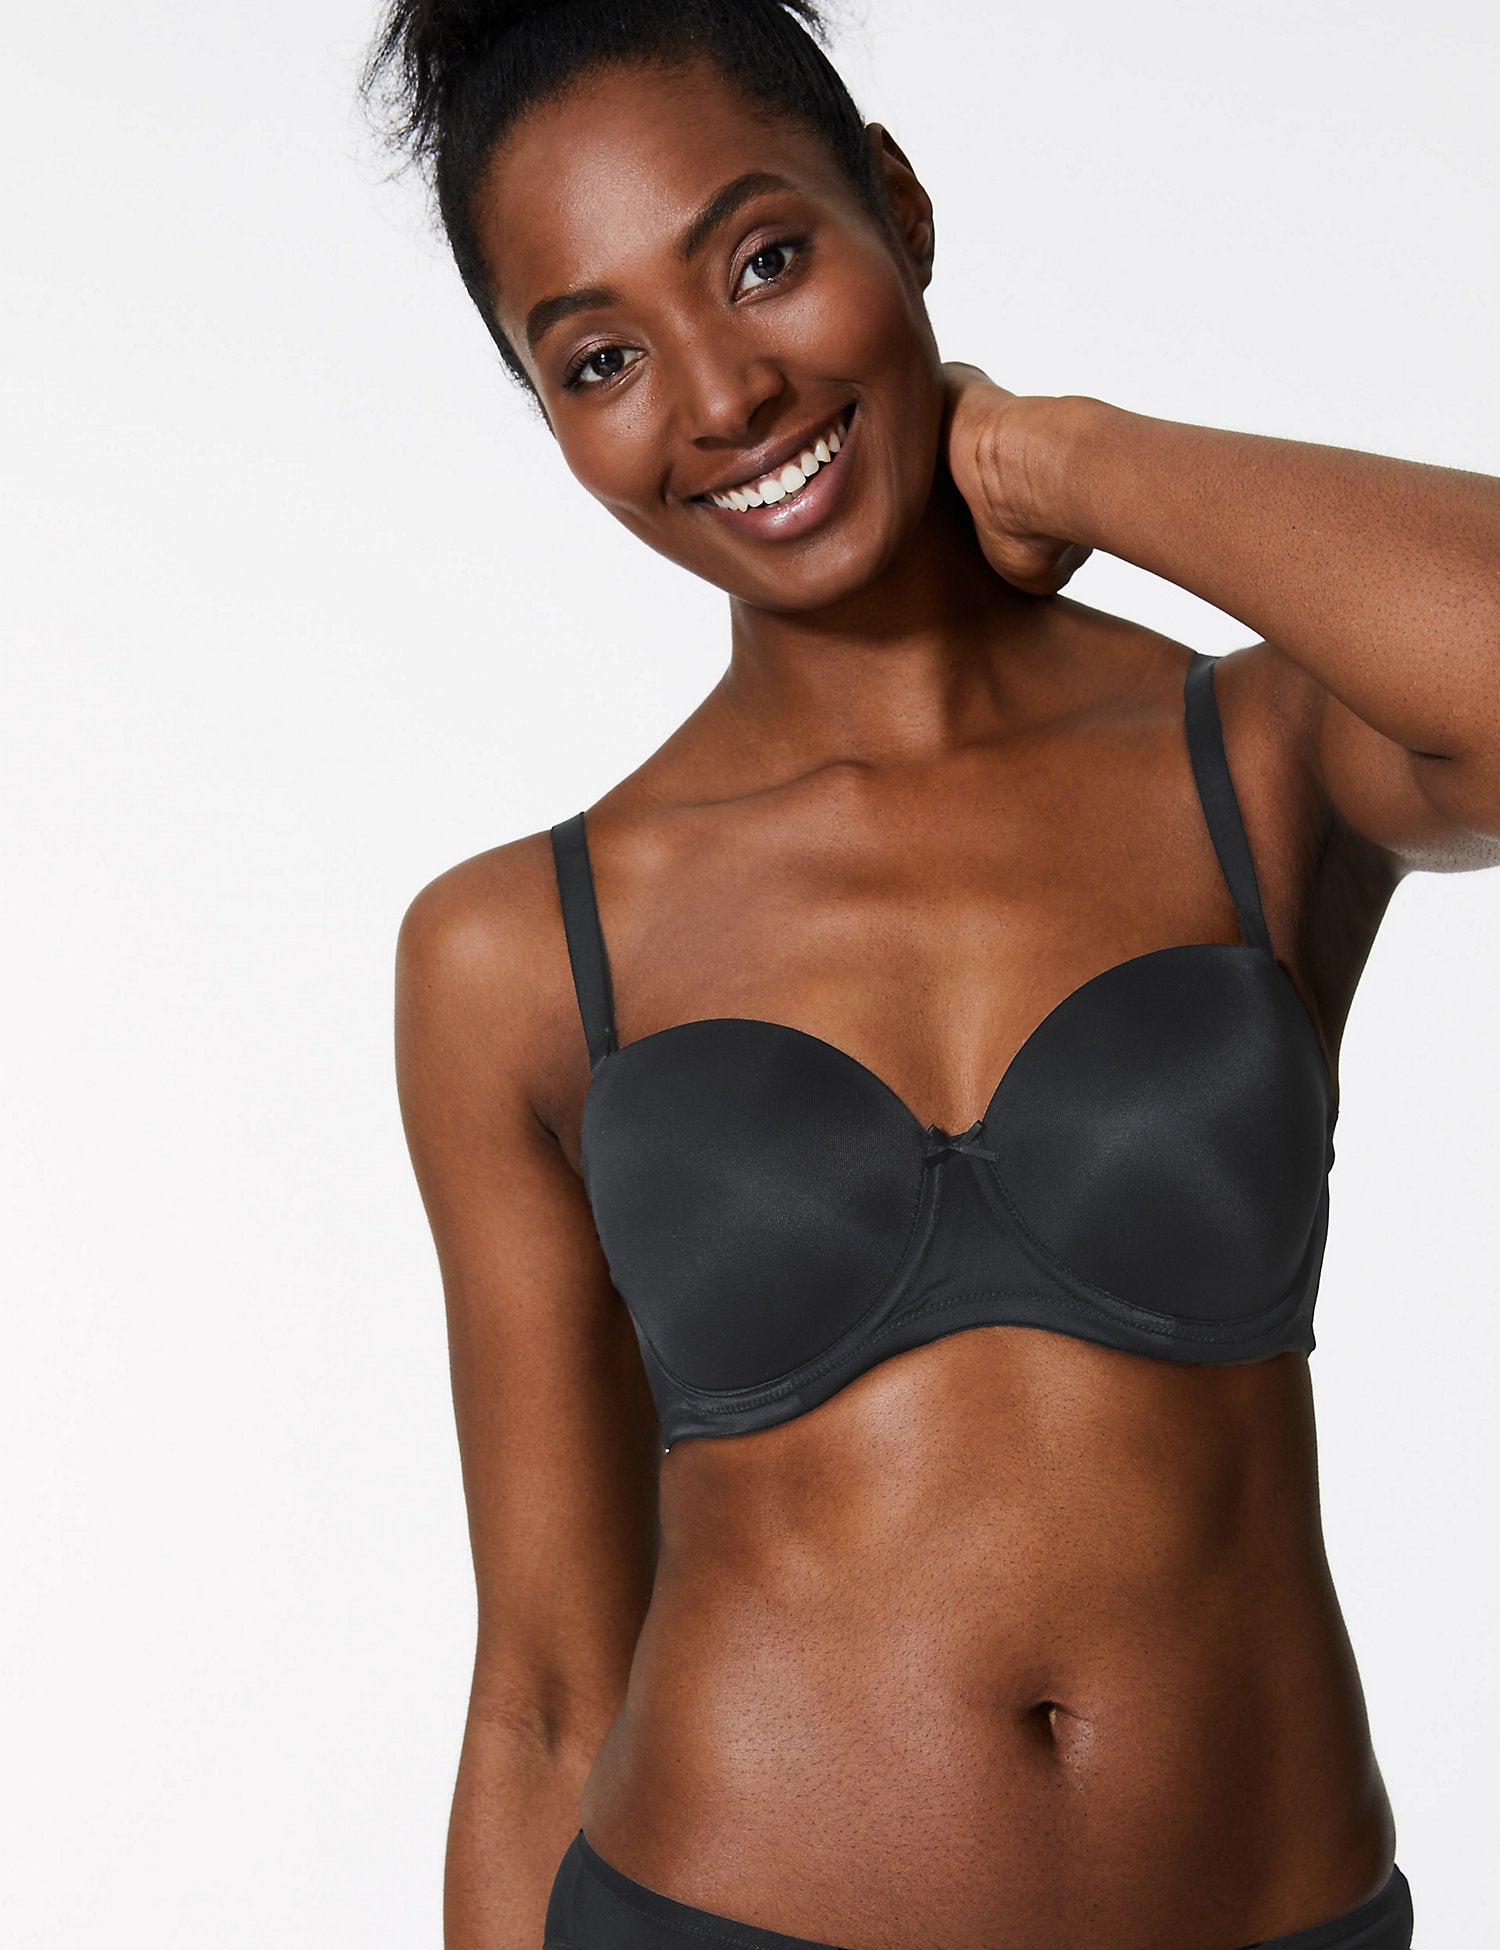 DD+ non paDDed bras - 53 products